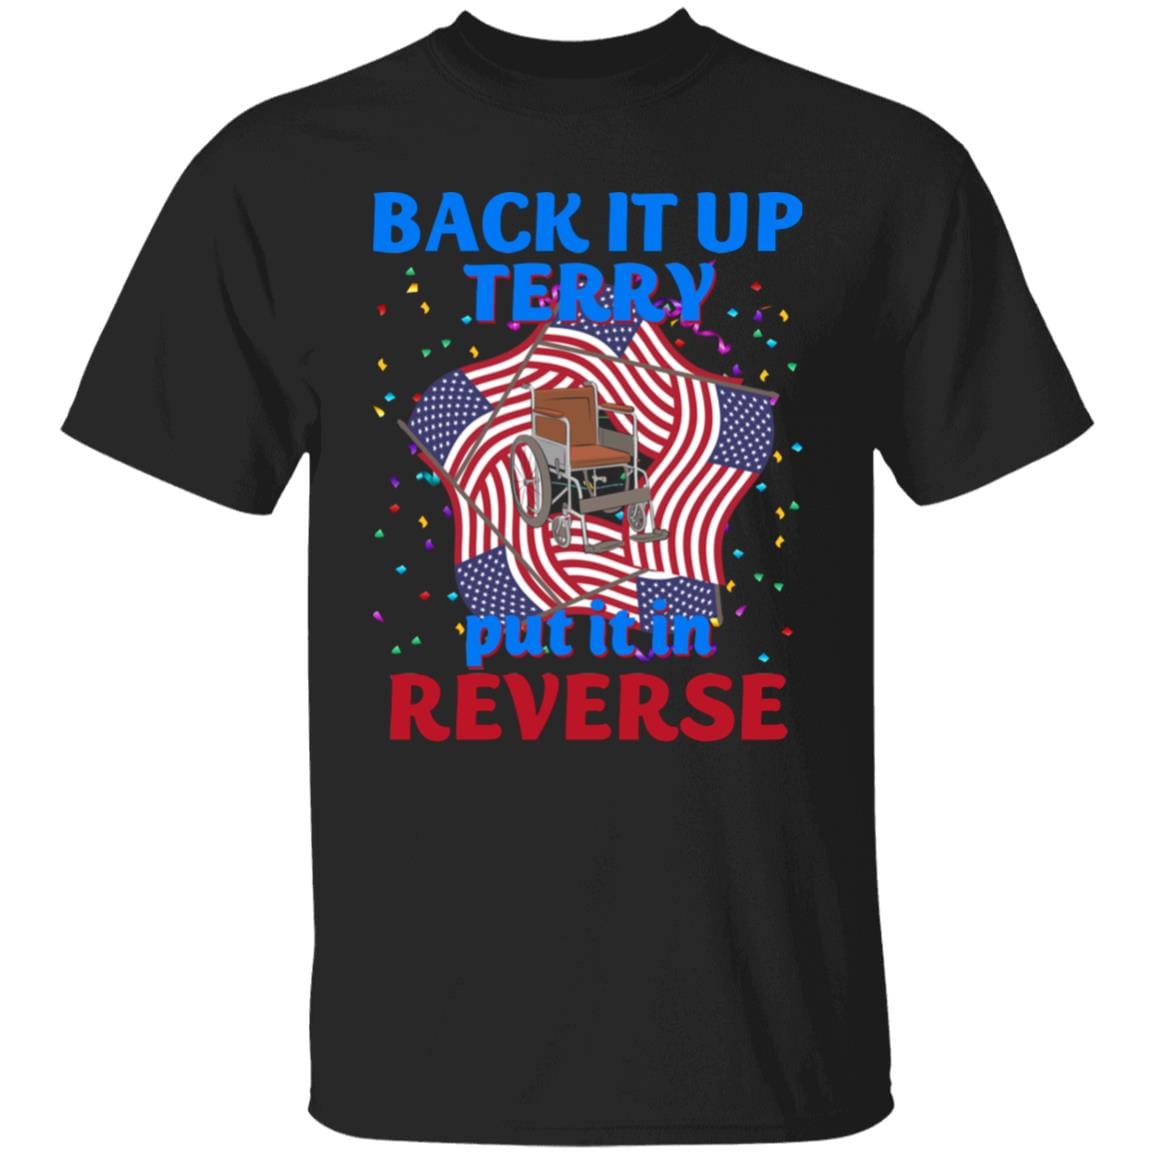 GeckoCustom Back It Up Terry Put It In Reserve American Flag USA 4th Of July H415 Basic Tee / Black / S